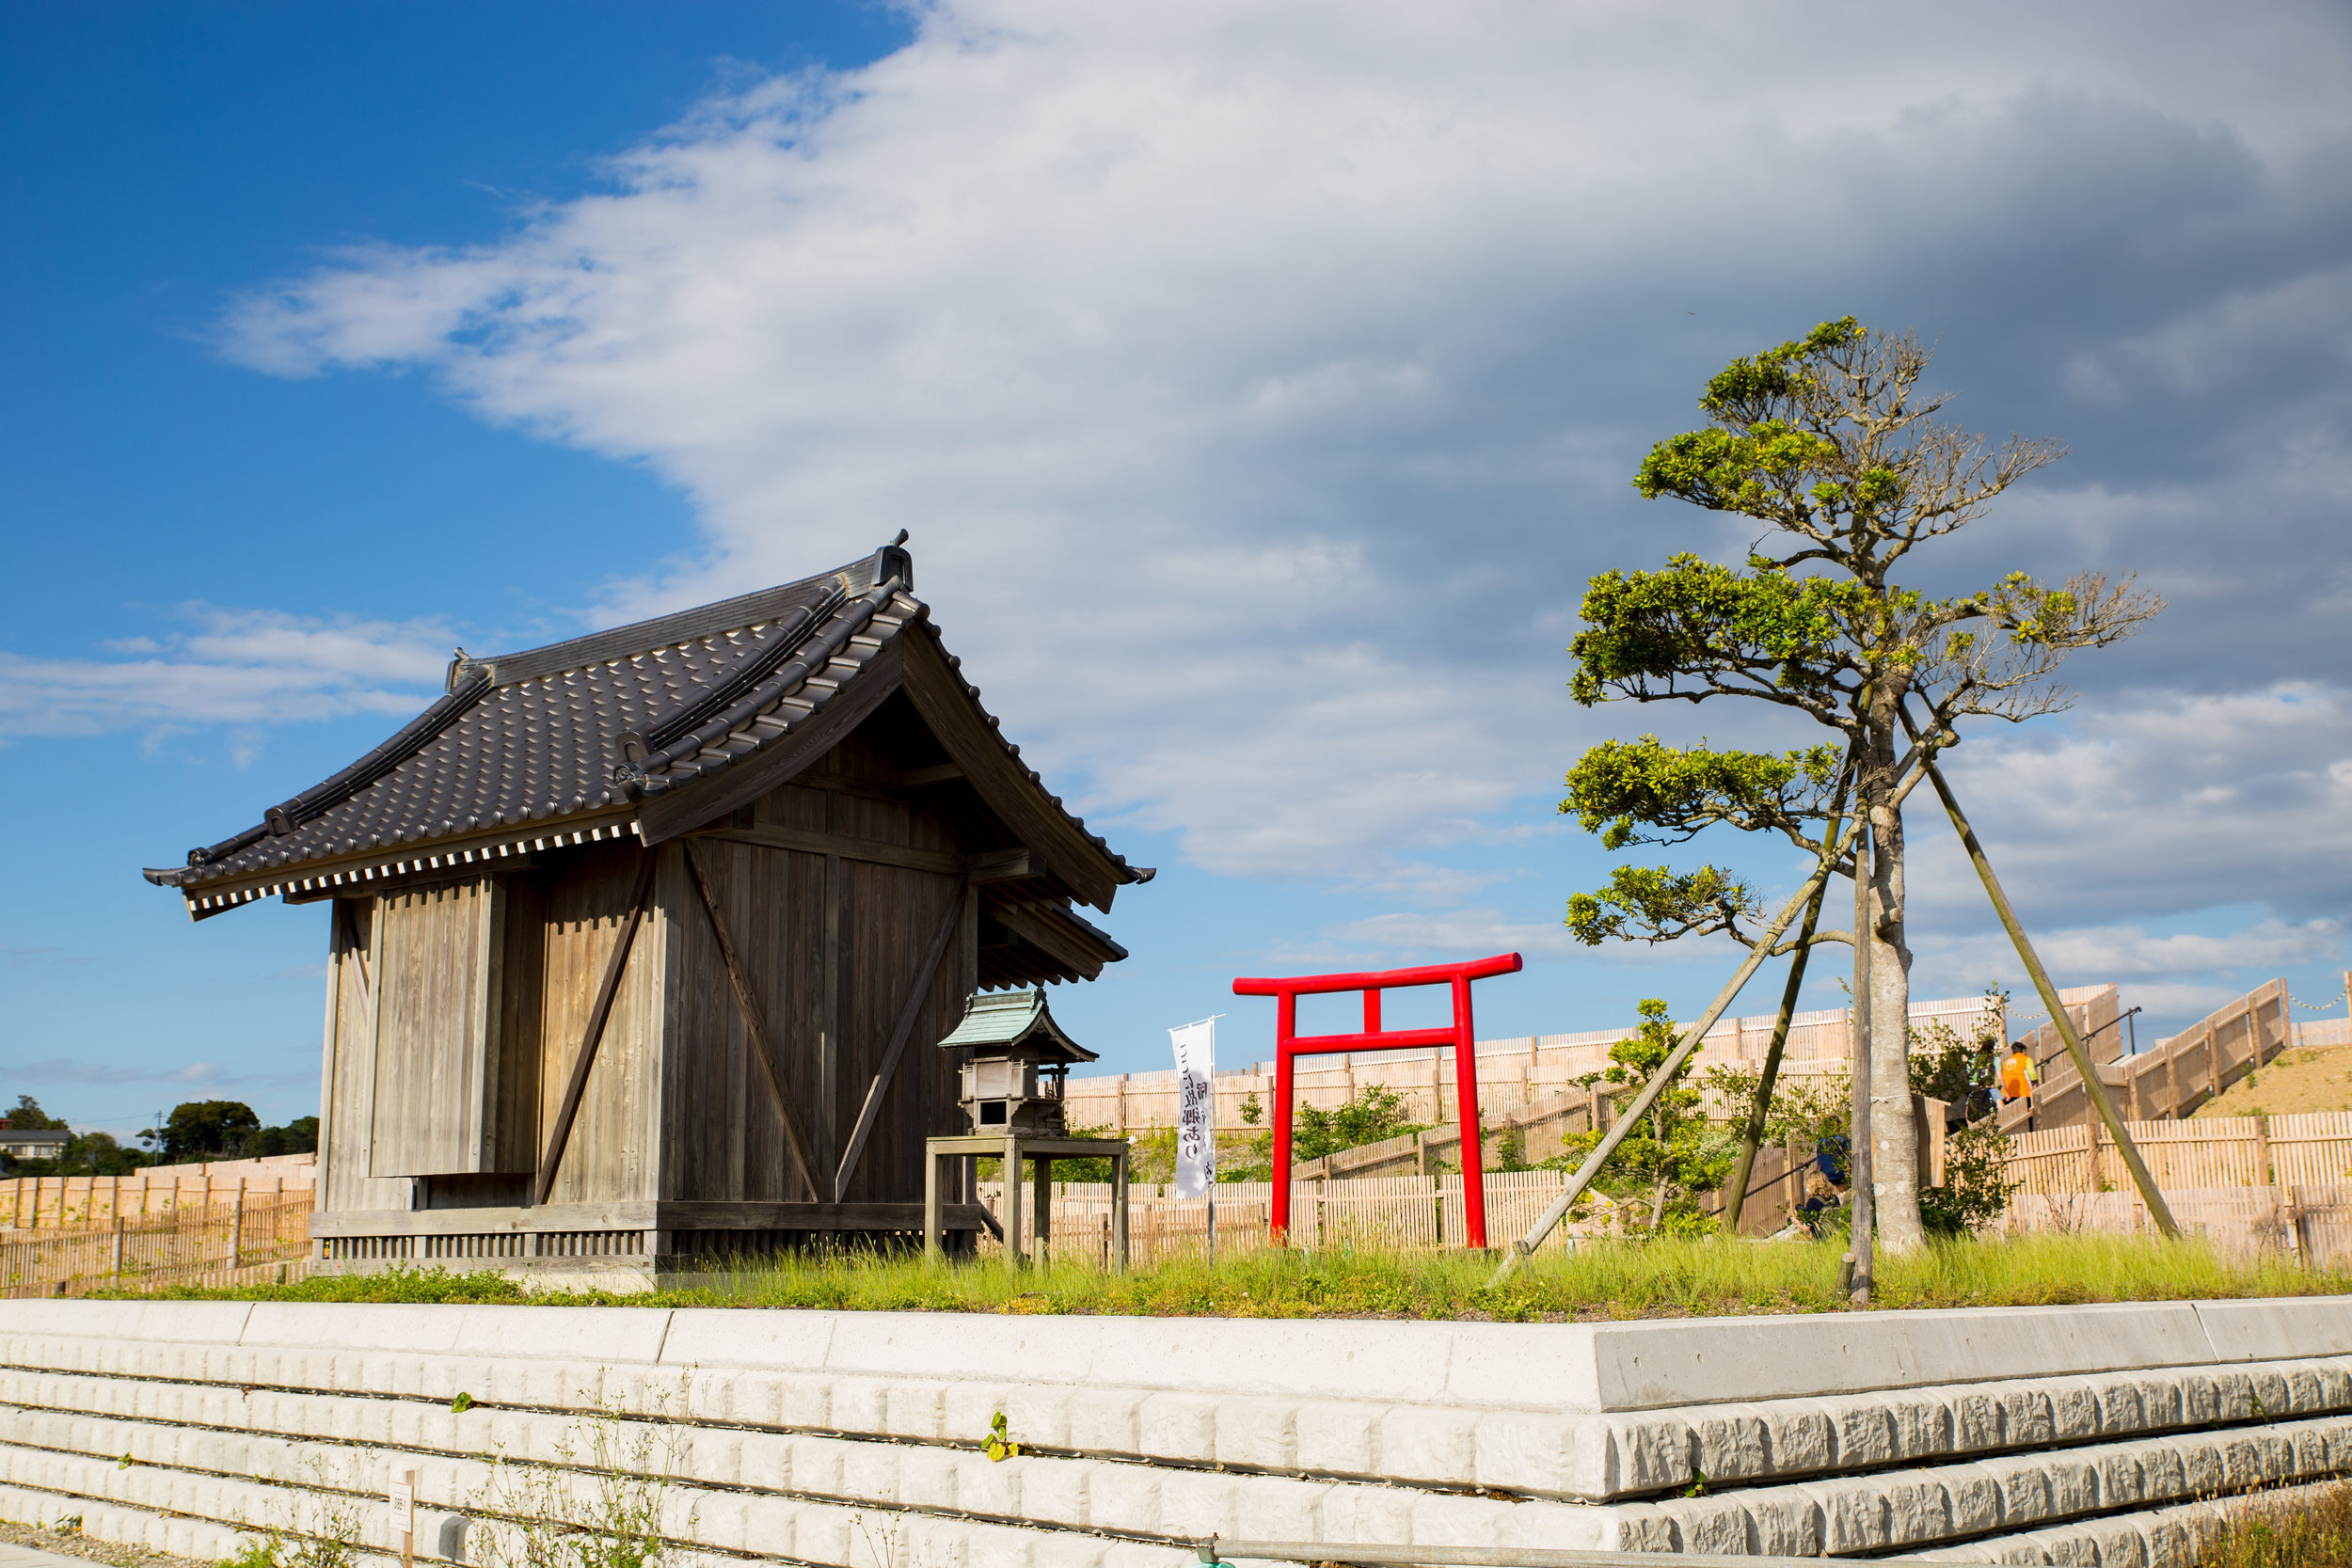  After all the other buildings on the coast of Hisanohama were swept away by the tsunami, this shrine was the only structure still standing.&nbsp; 